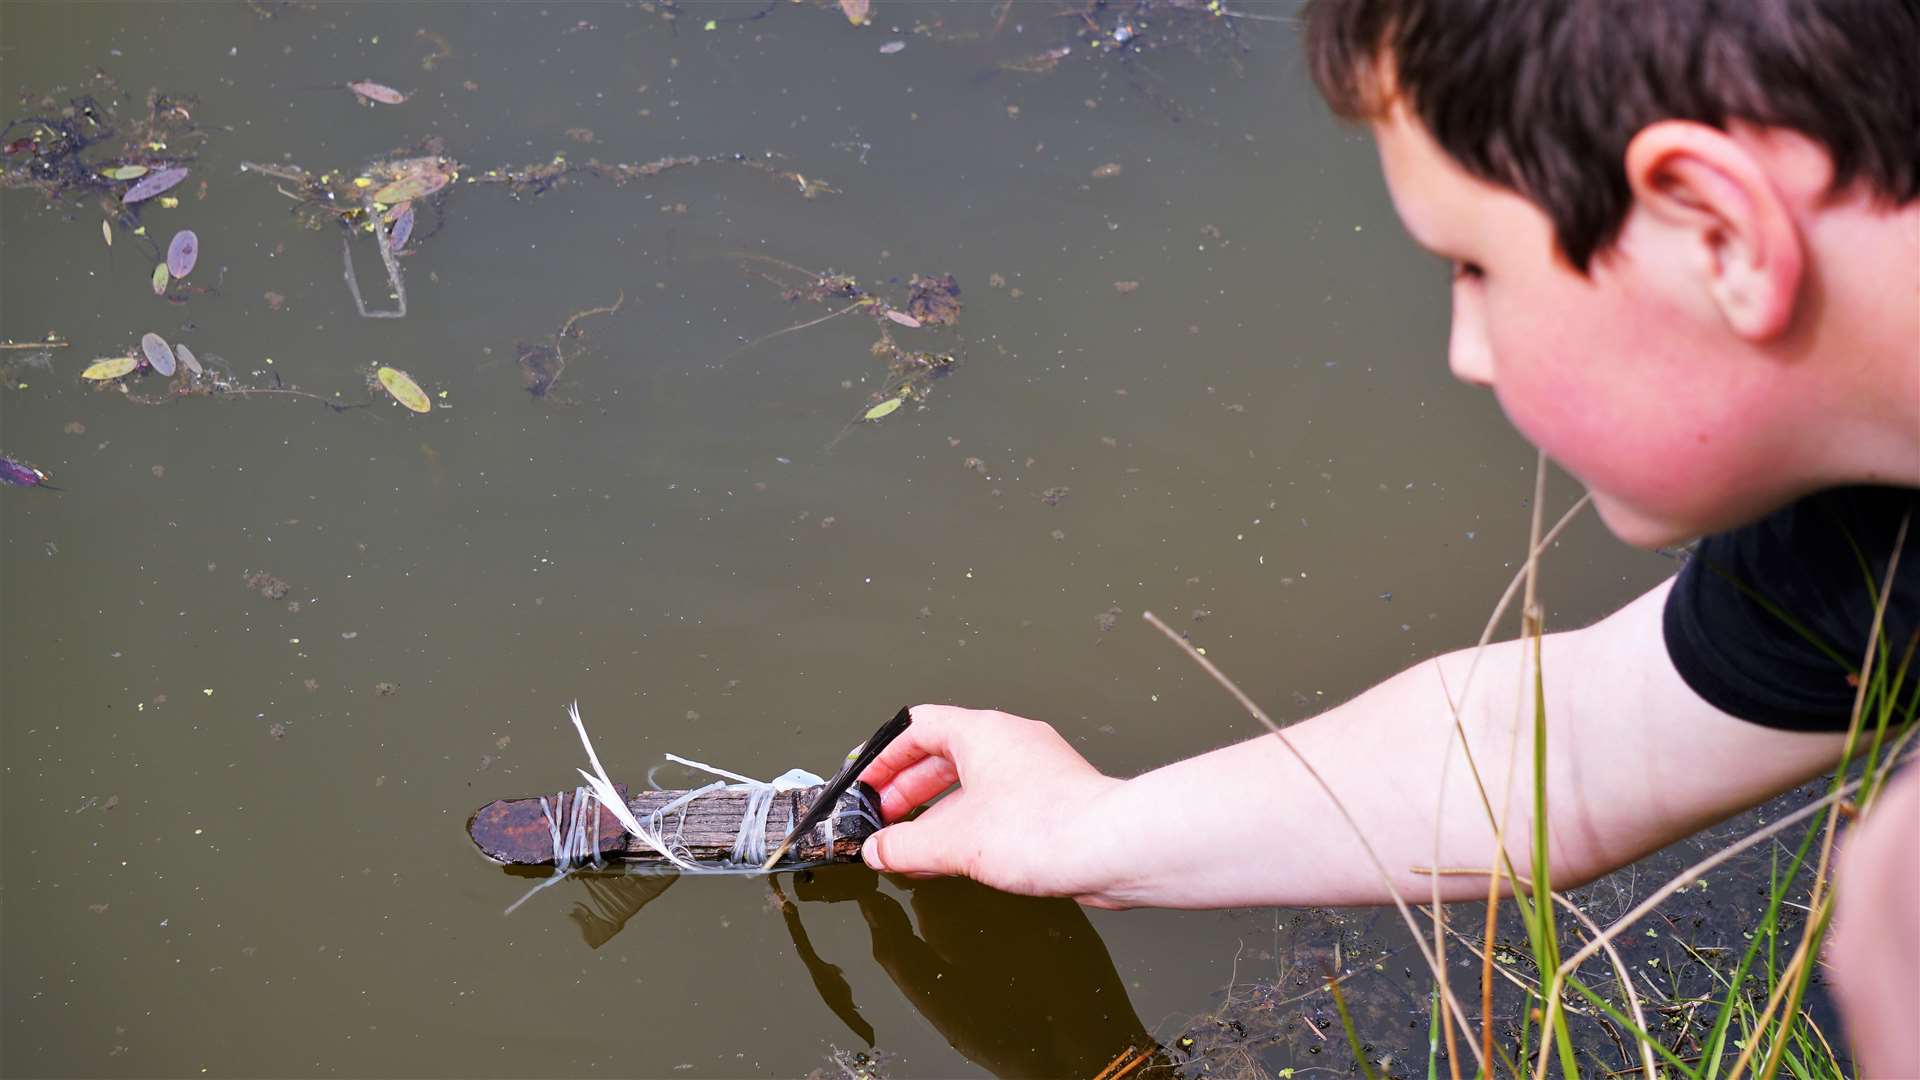 This boy made a boat out of found objects and floated it on the pond. Picture: DGS